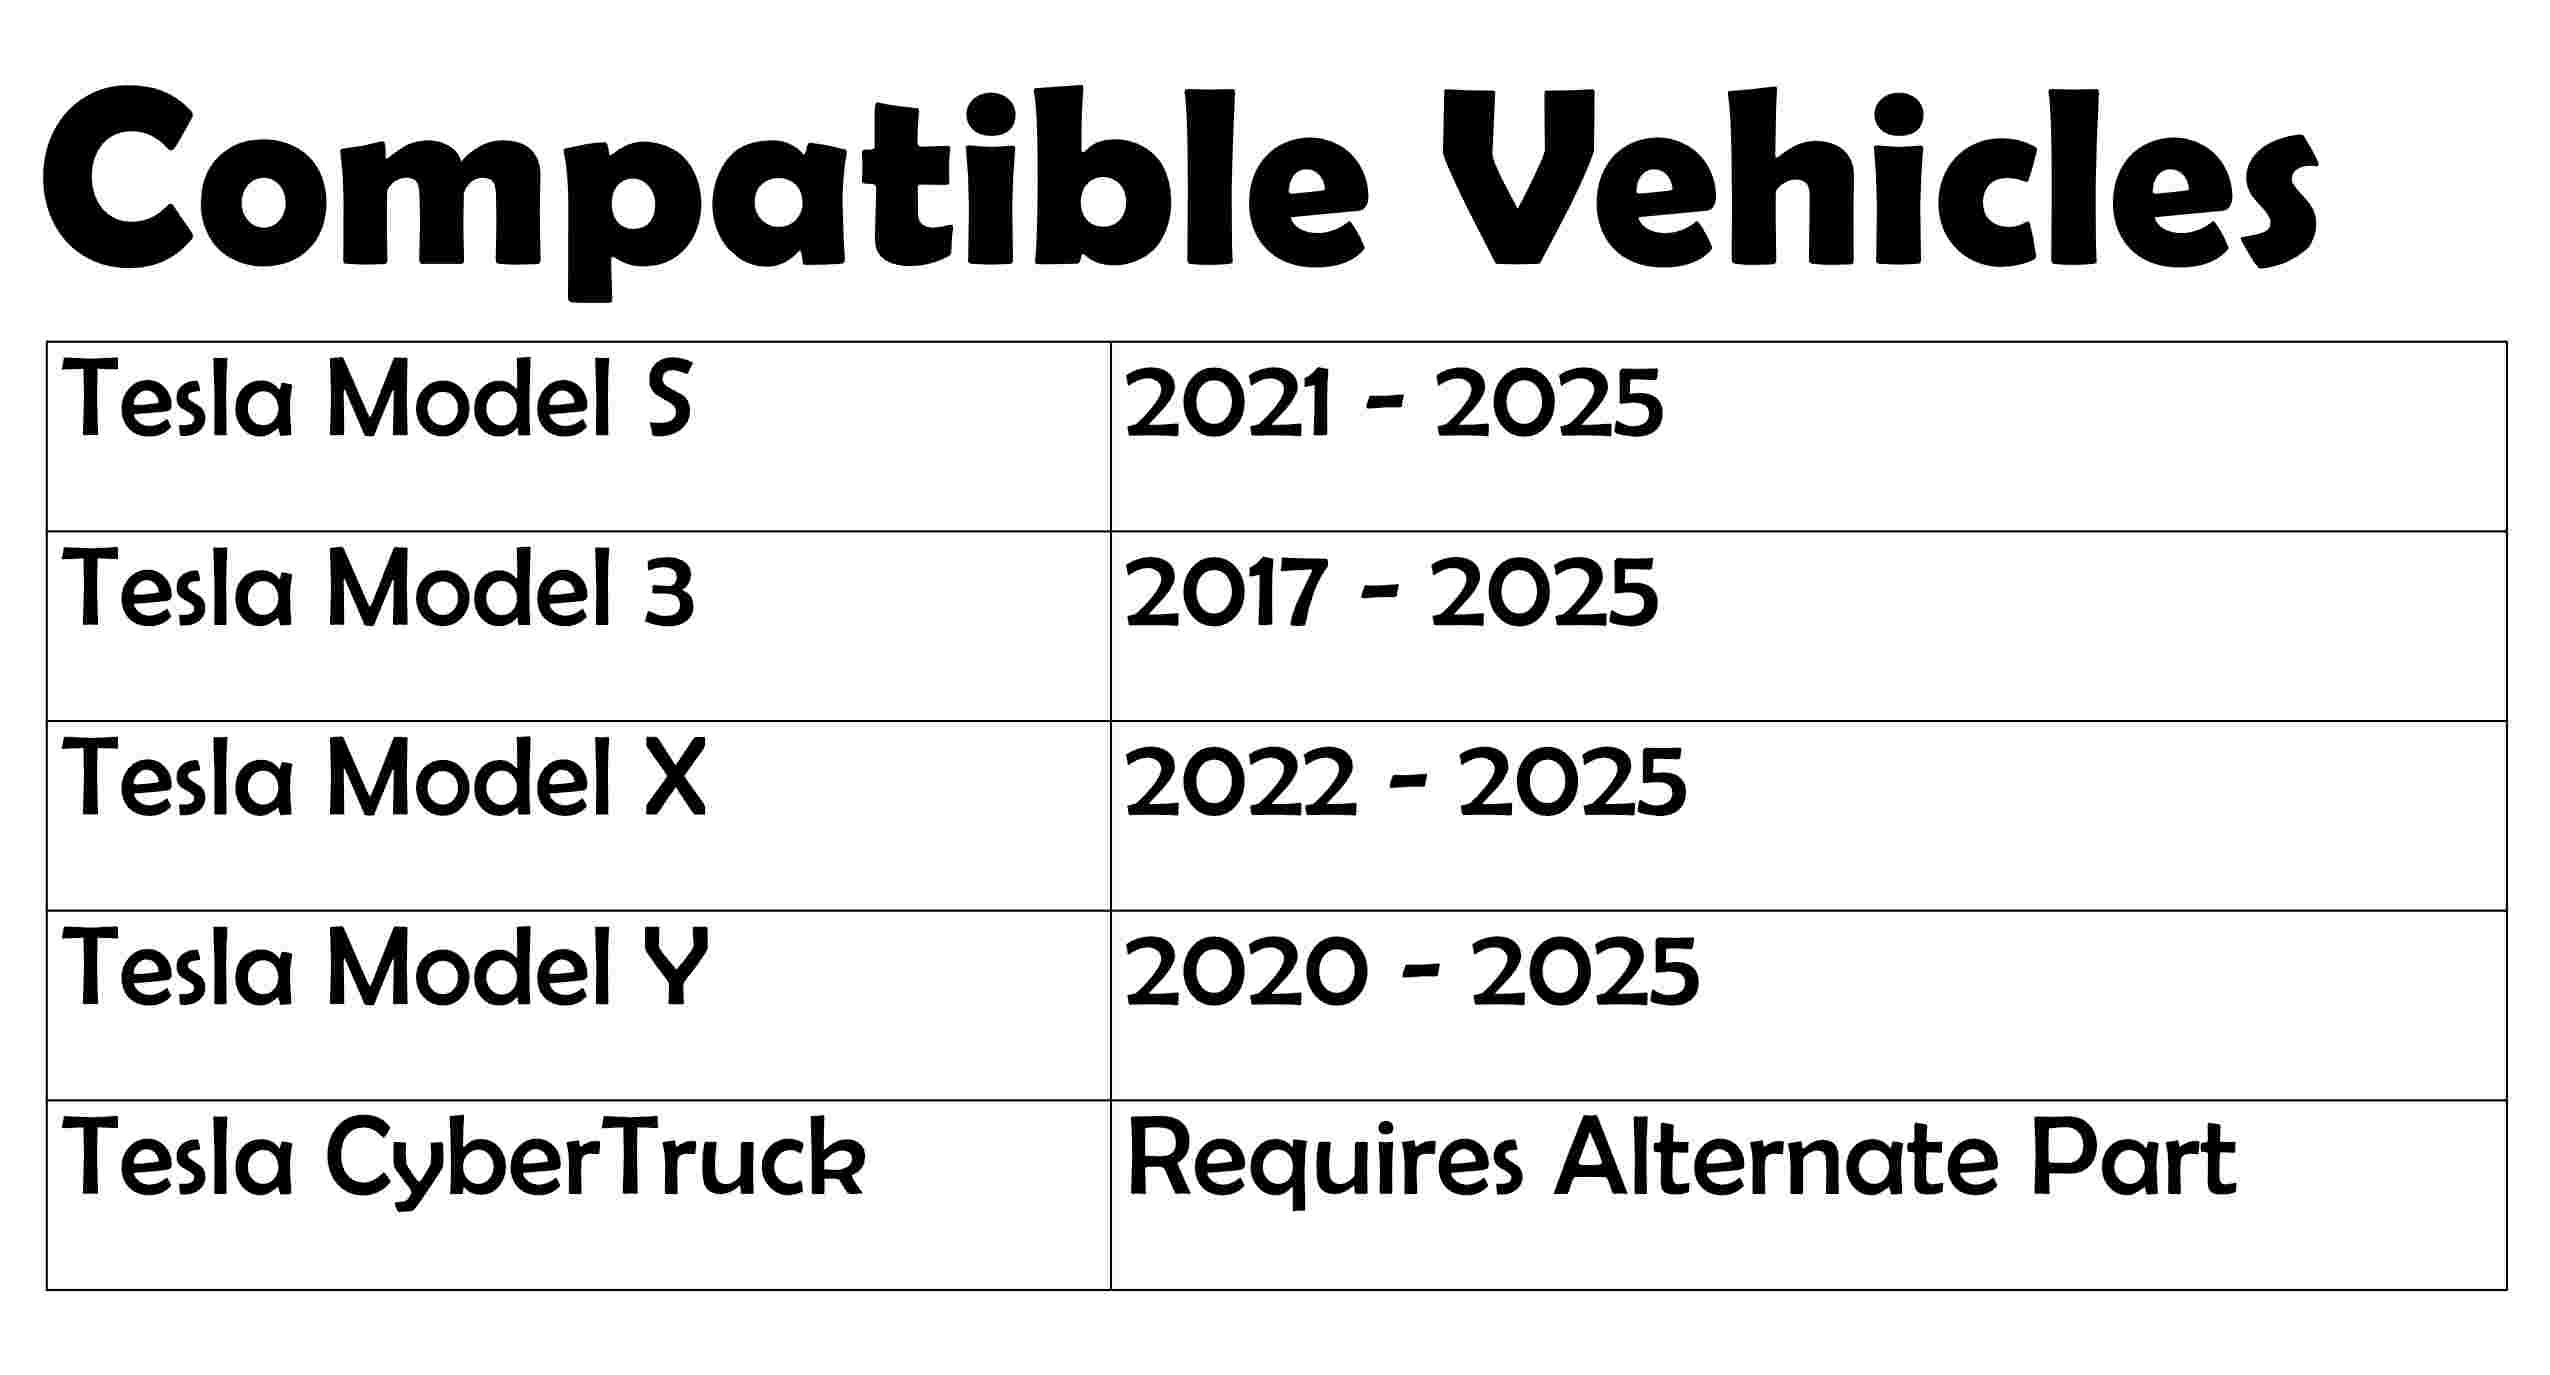 Table showing compatible vehicles for this radar unit and platform combination